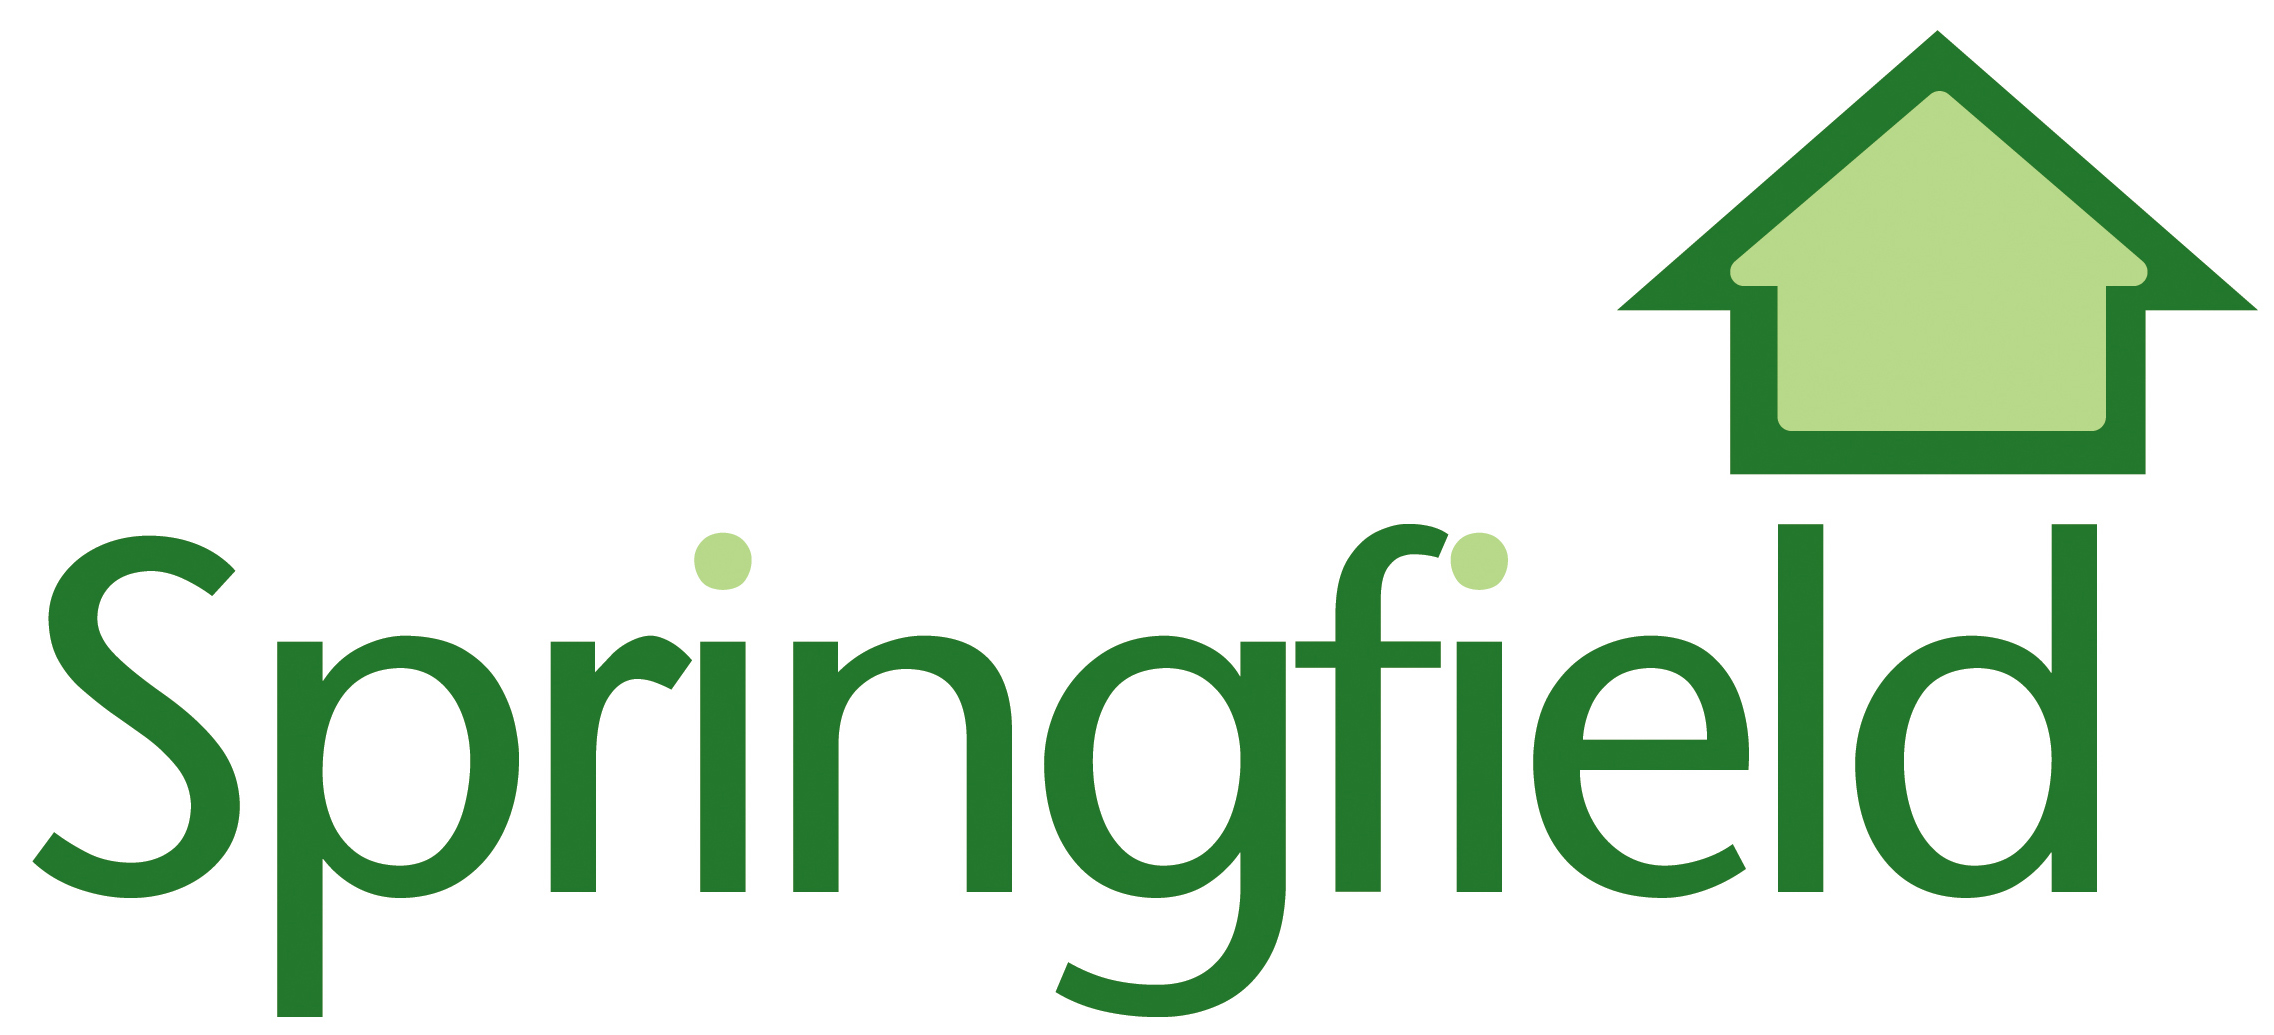 Springfield Properties consults on new homes plan in Barlanark